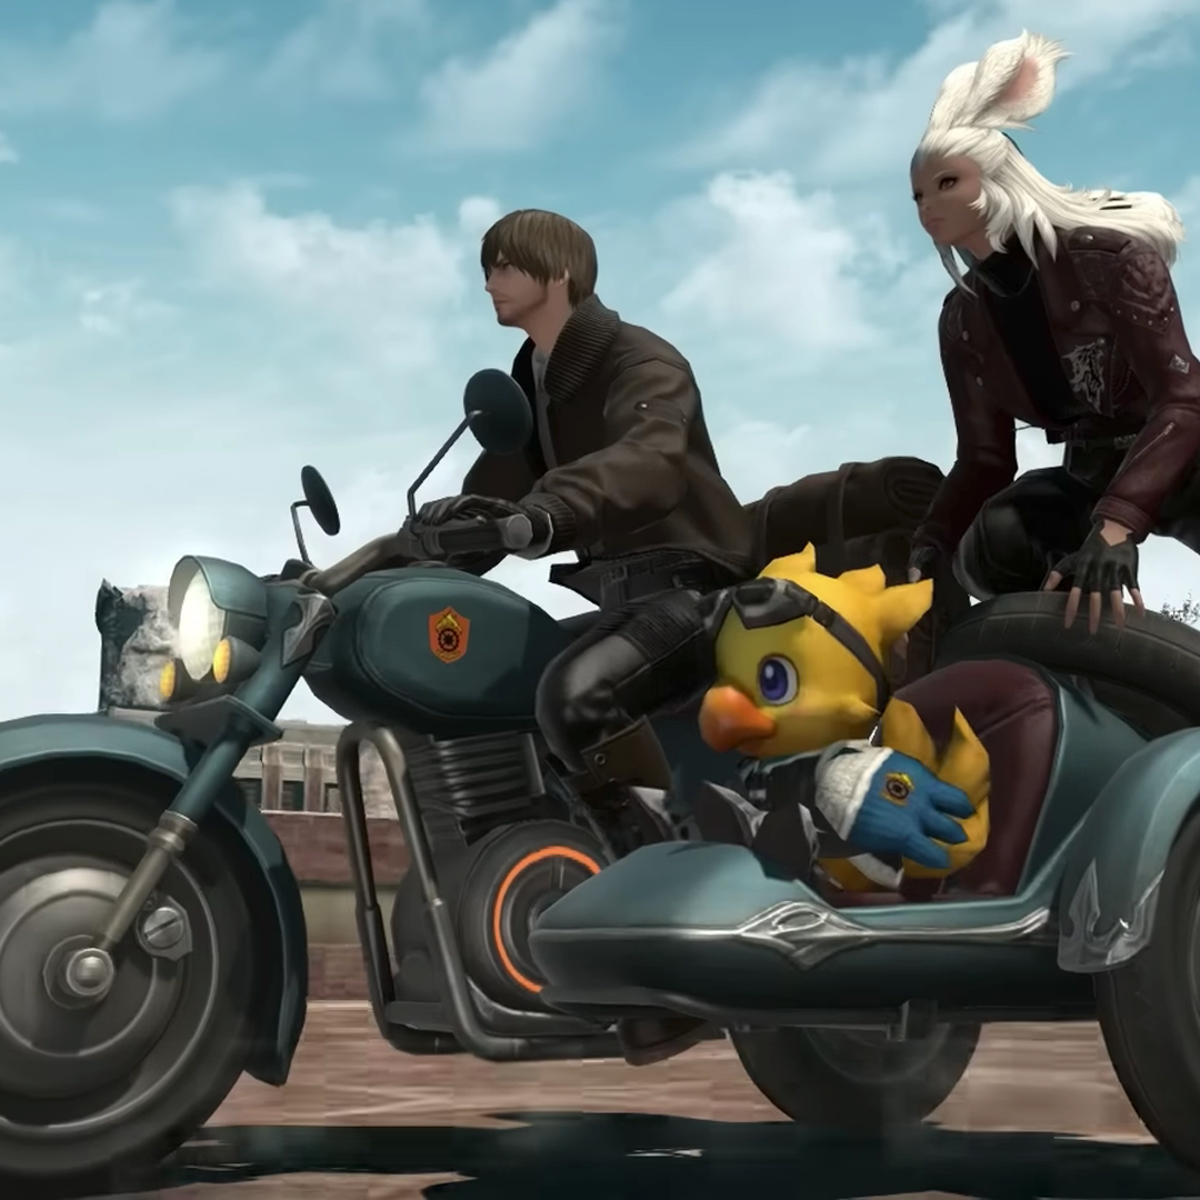 Final Fantasy 14's new motorcycle mount has its adorable chocobo